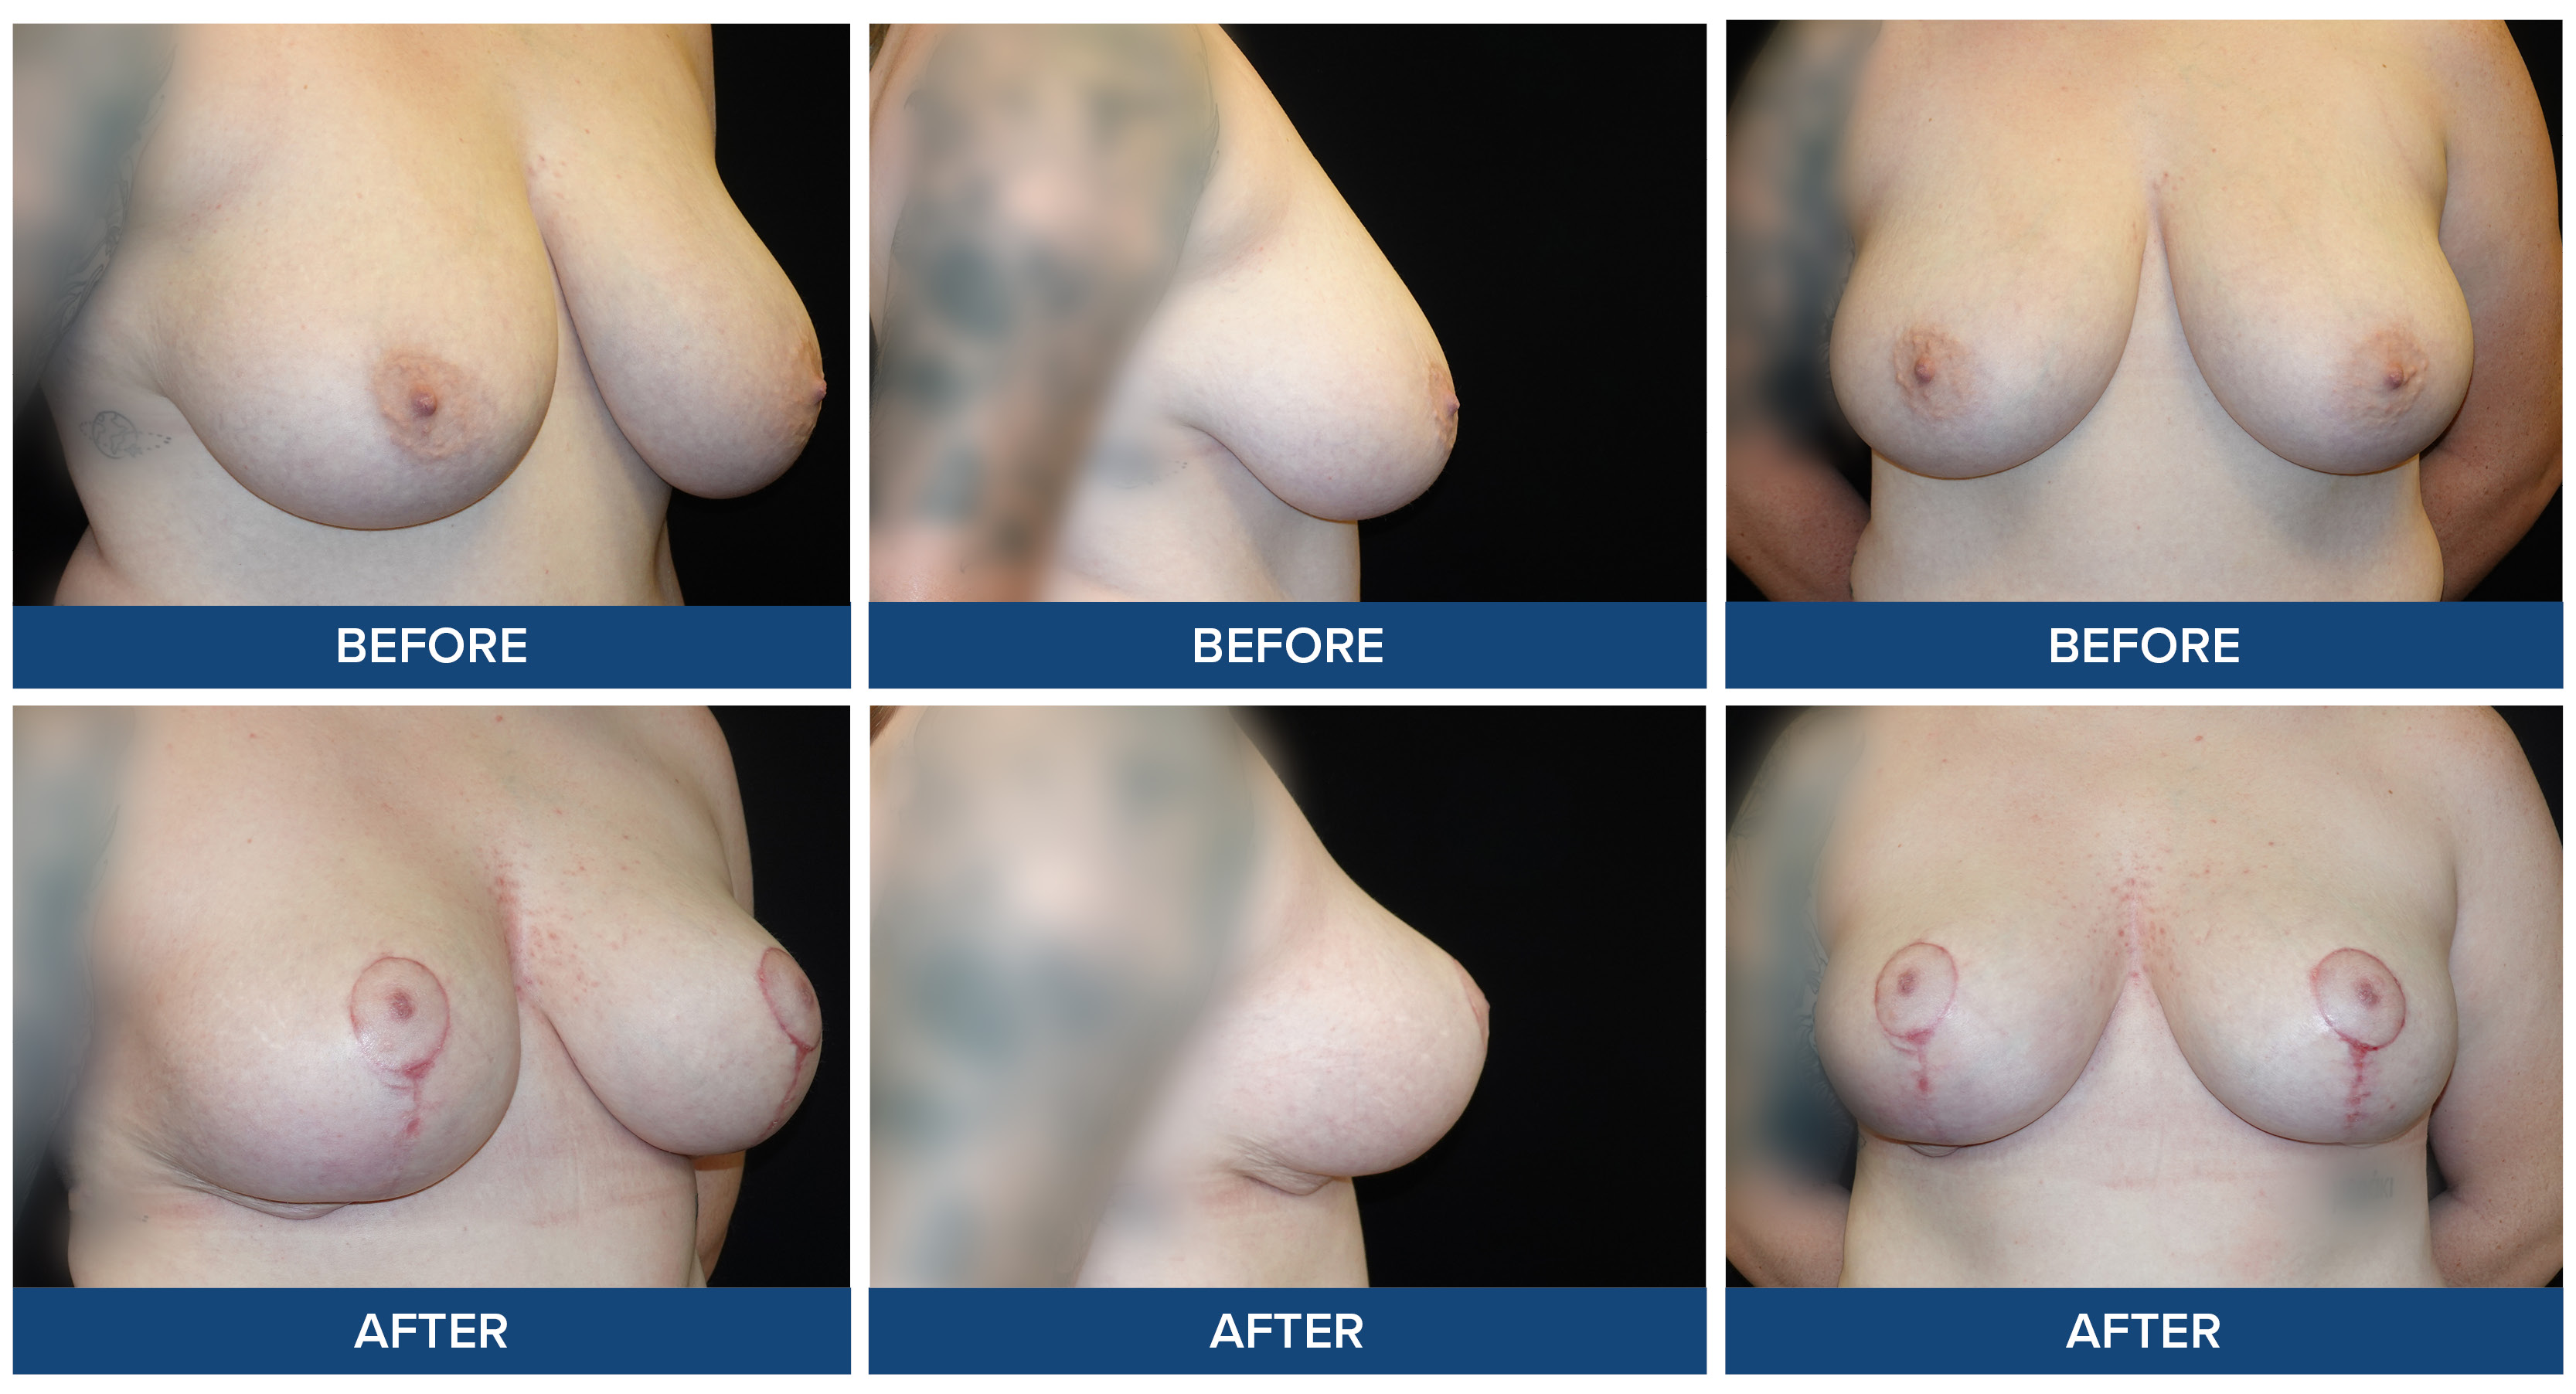 Before and after collage of female bilateral breast reduction surgery.